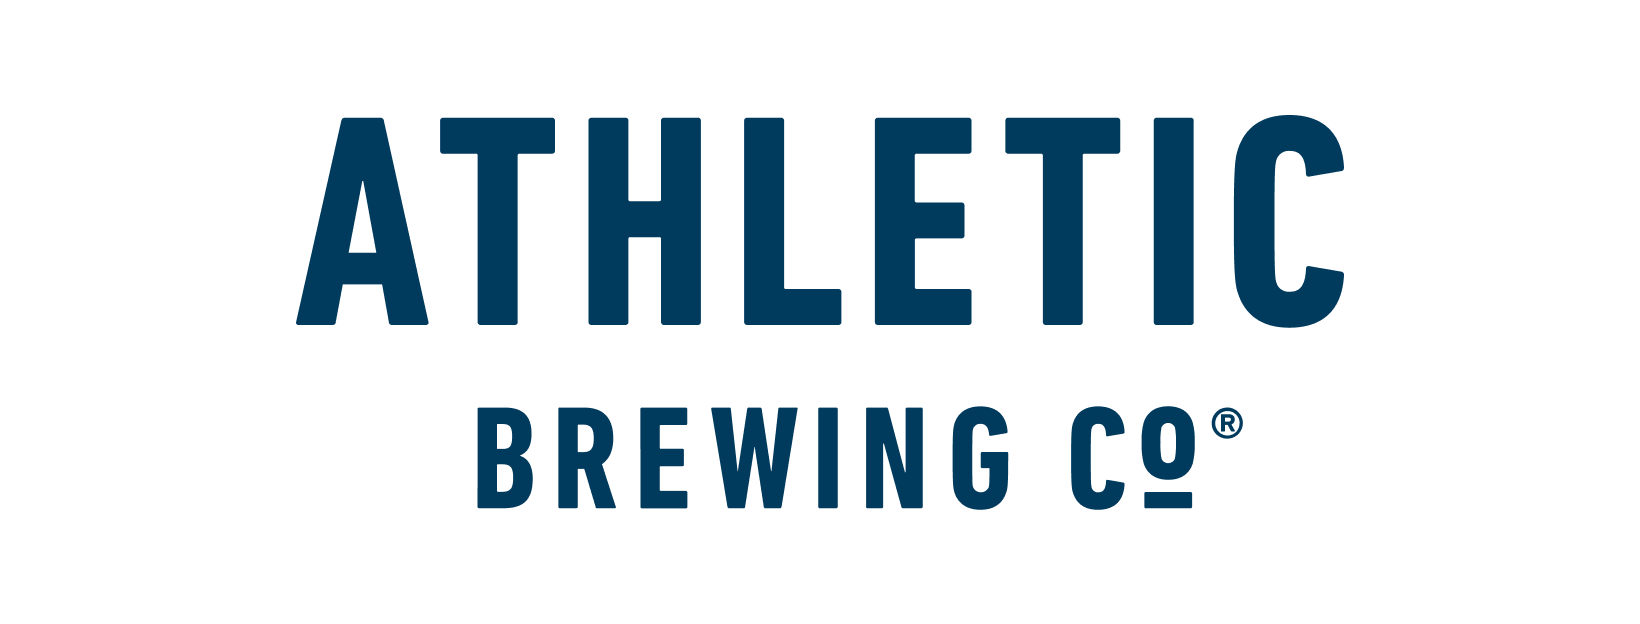 Athletic Brewing Co. Canada Official  logo